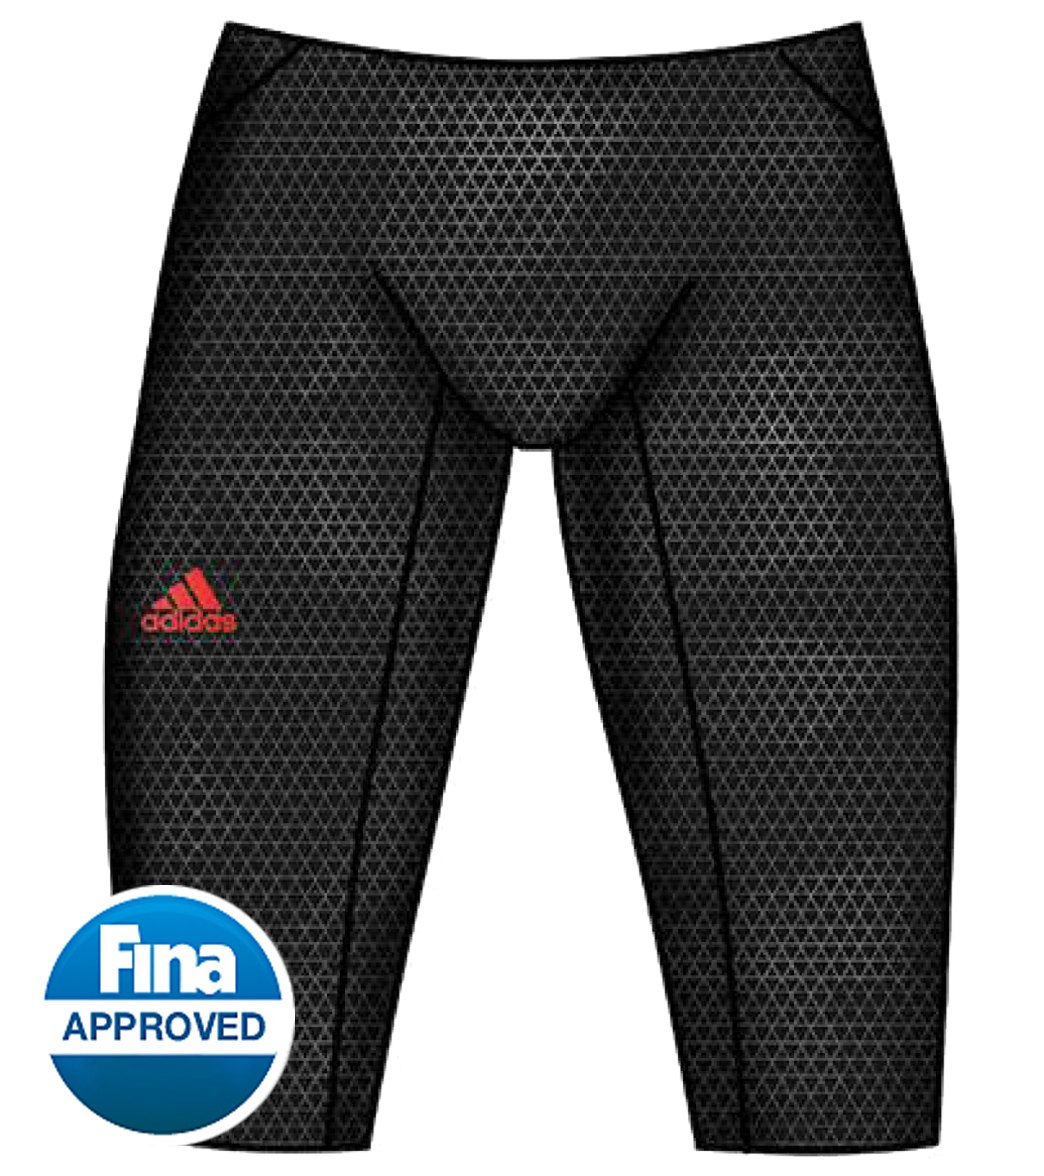 adidas elite competition jammer